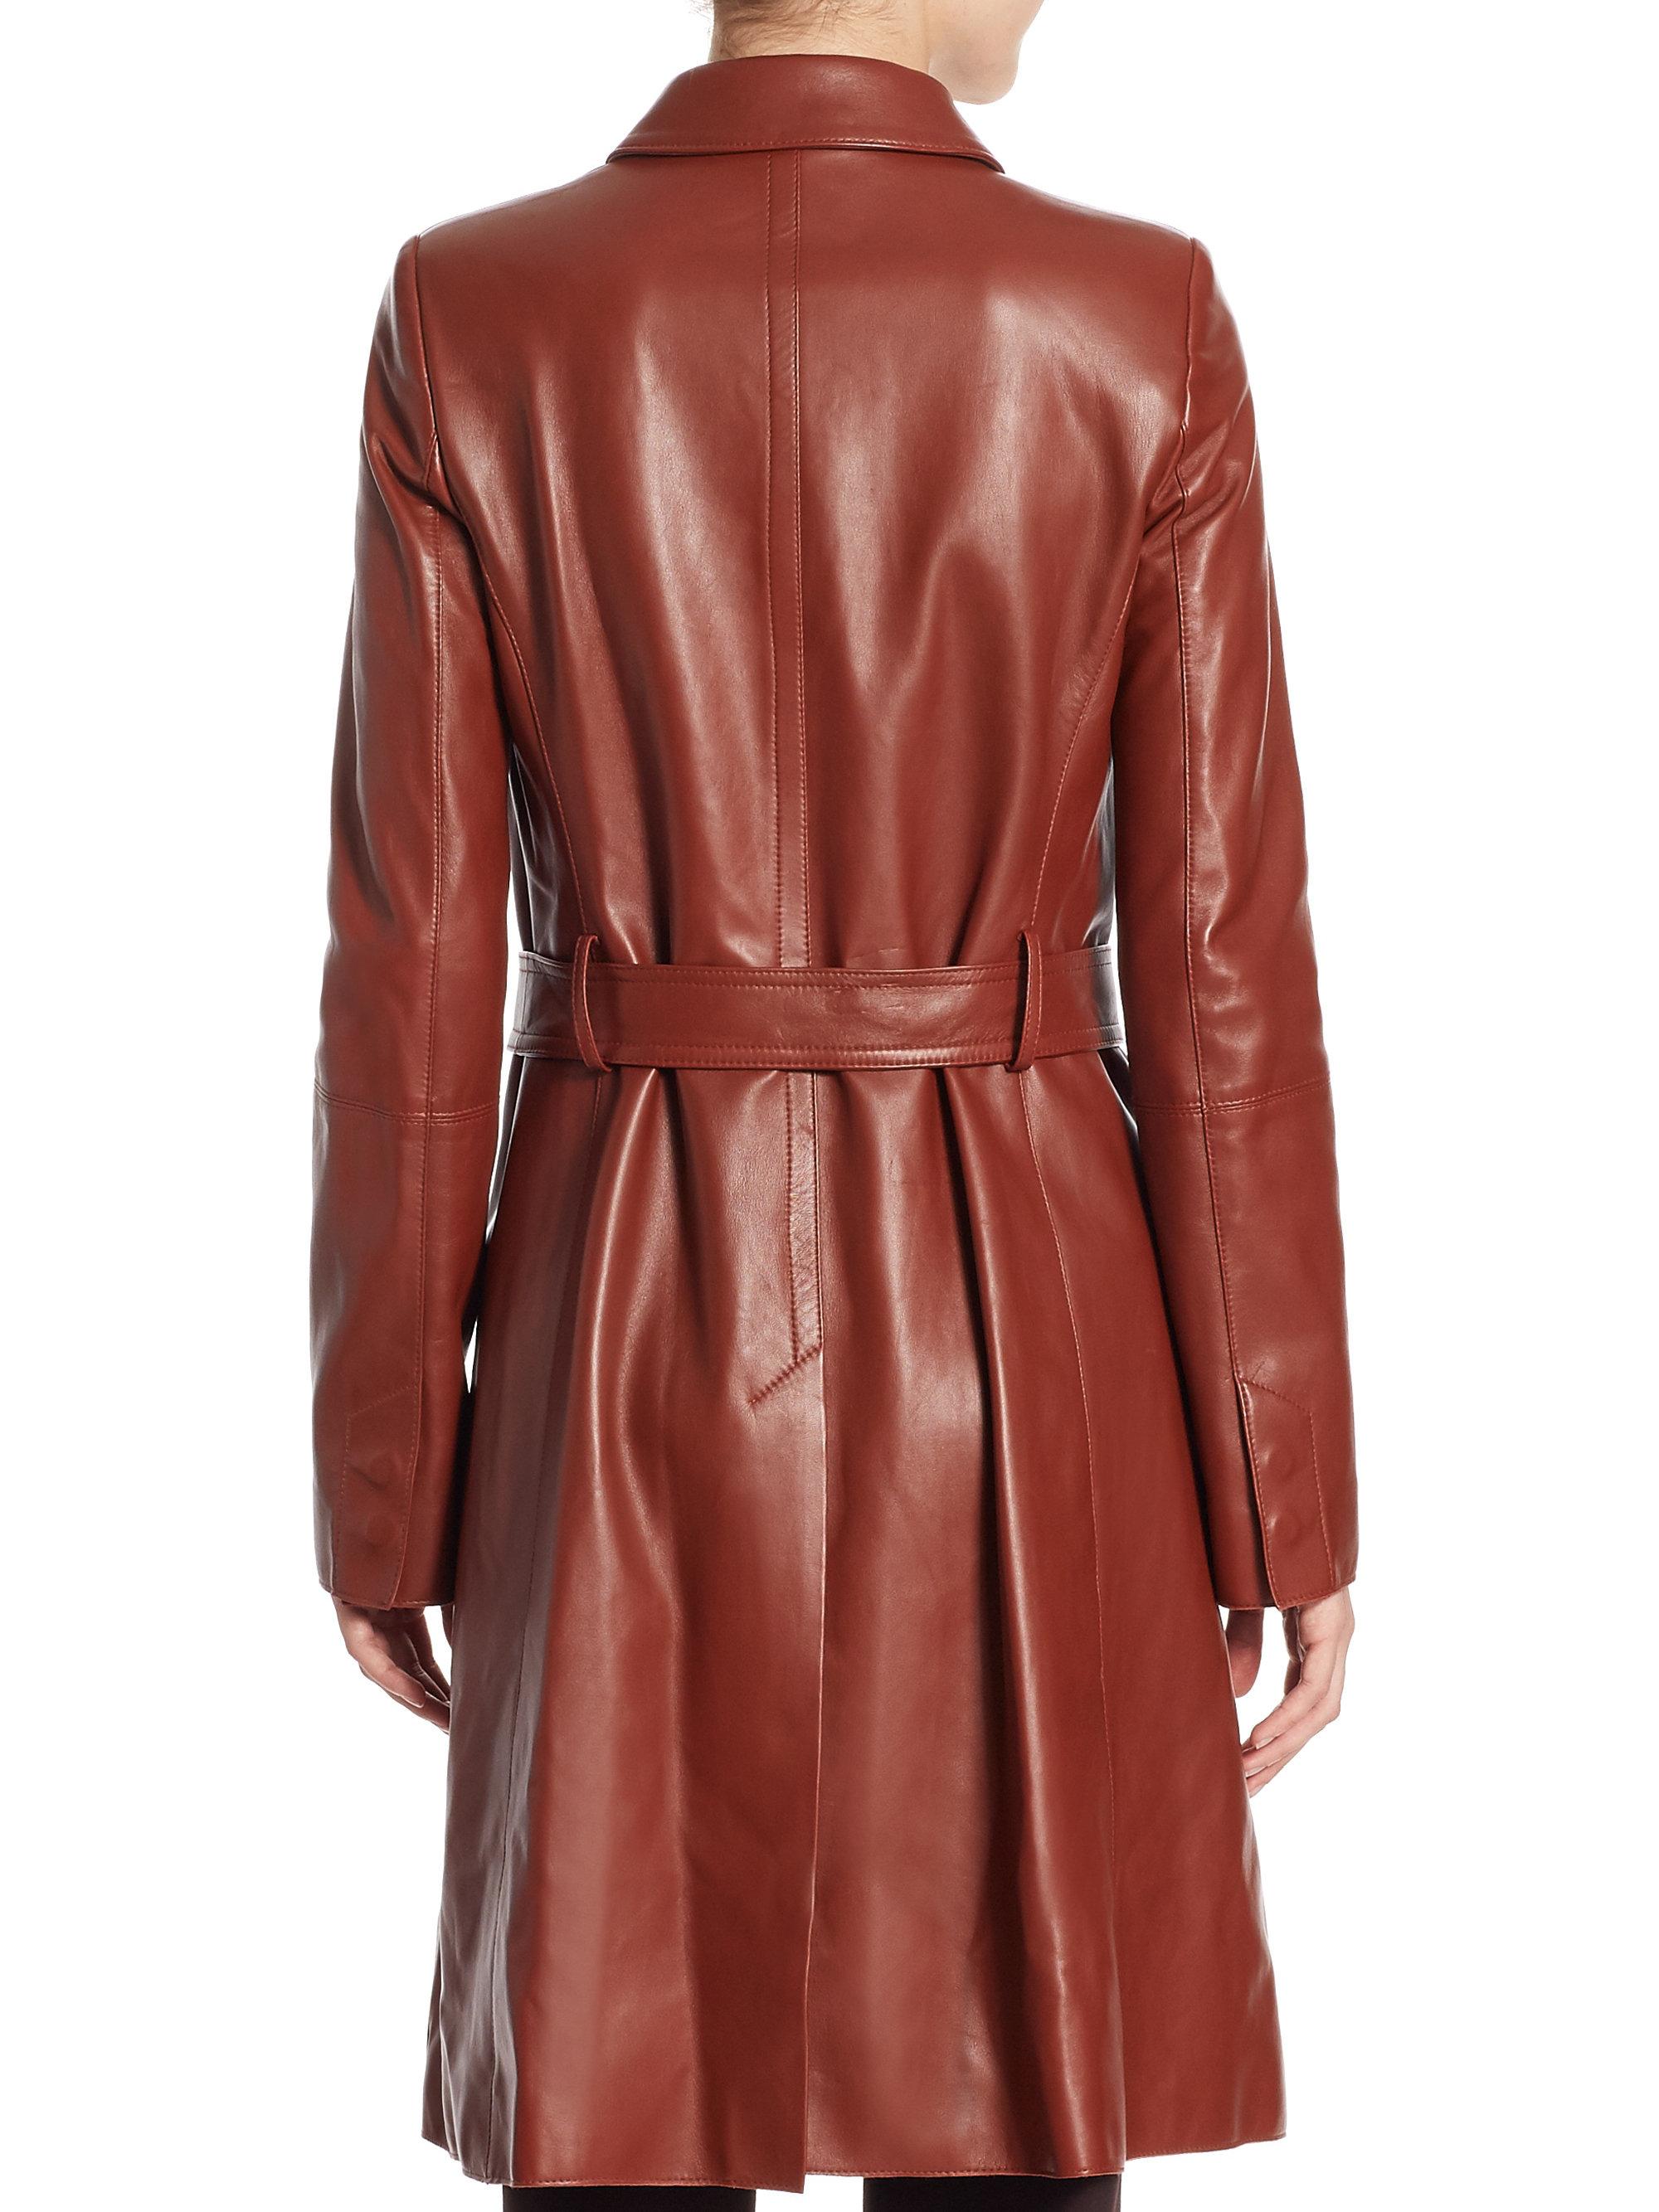 Lyst - Theory Mod Leather Trench Coat in Brown